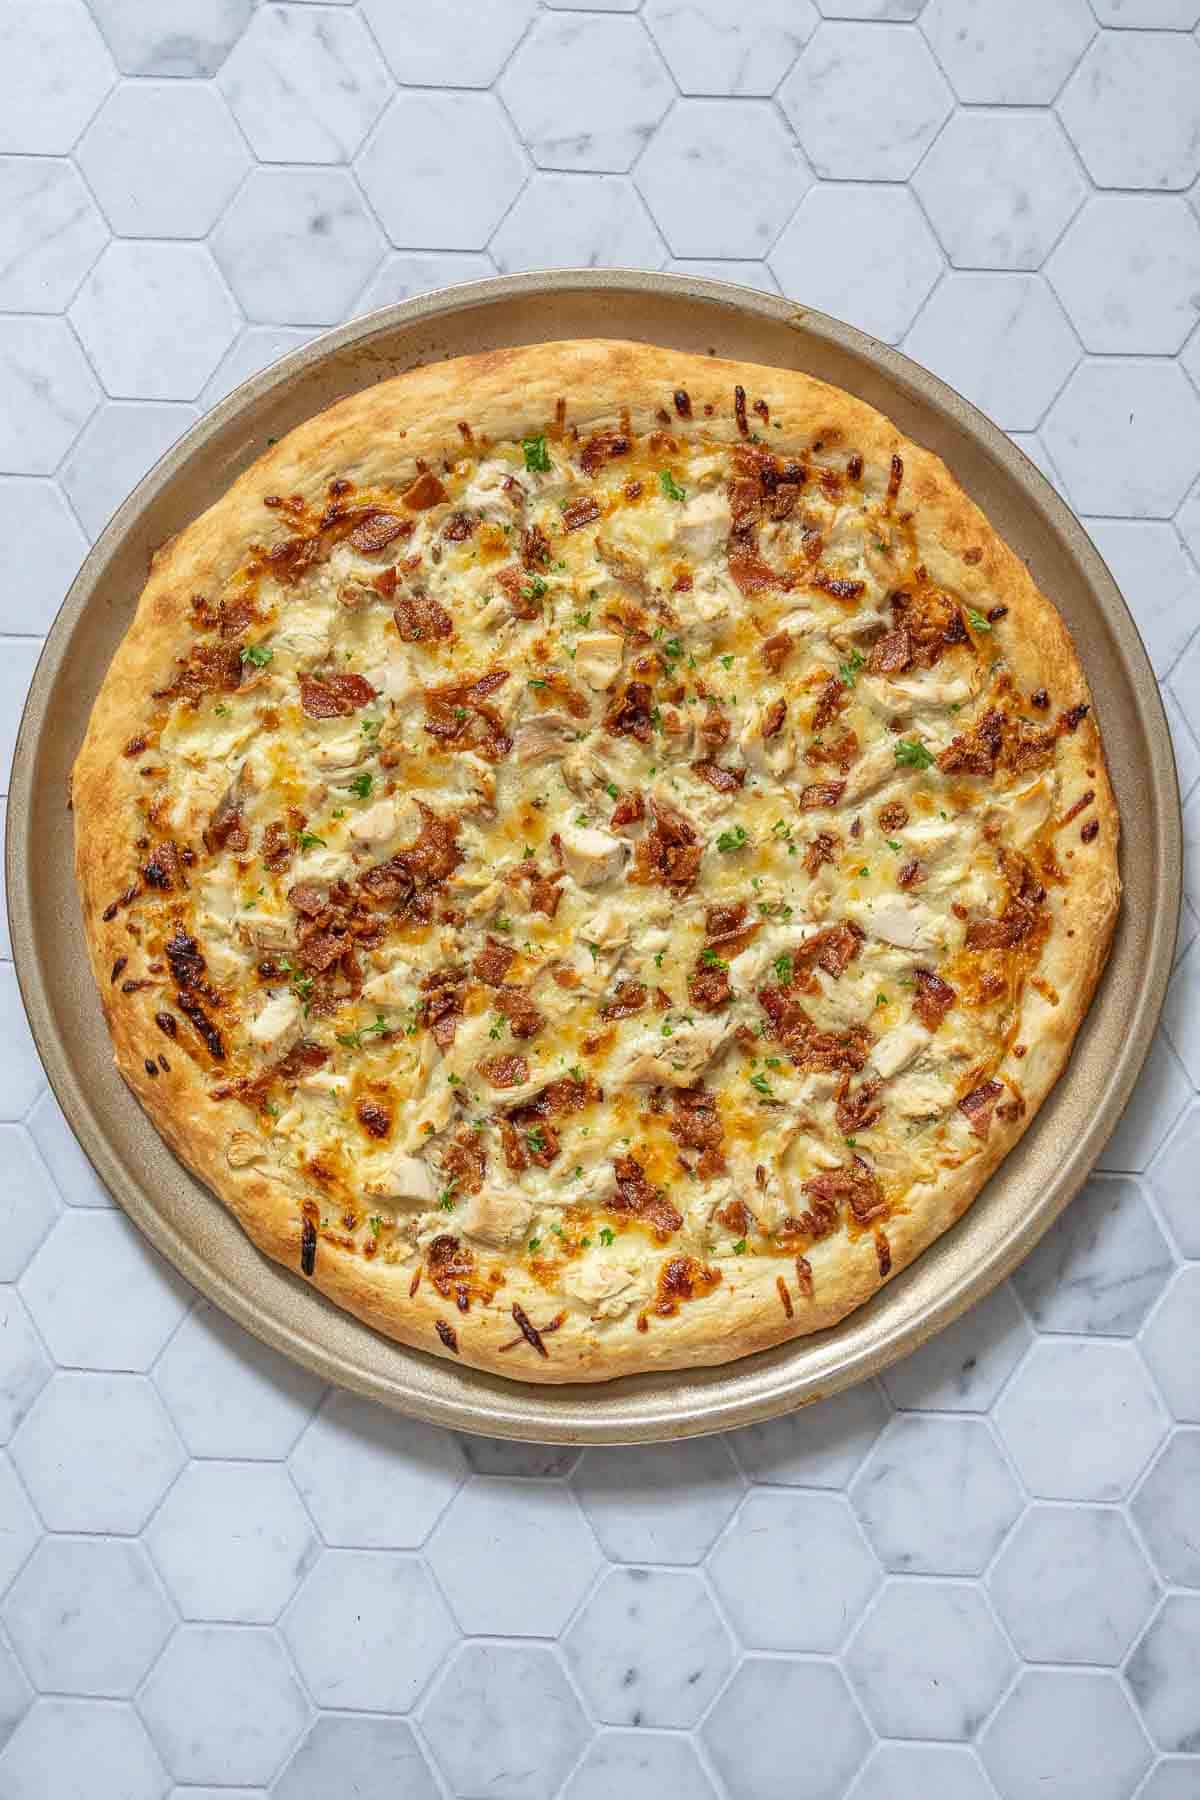 Whole chicken bacon ranch pizza on a tile surface.